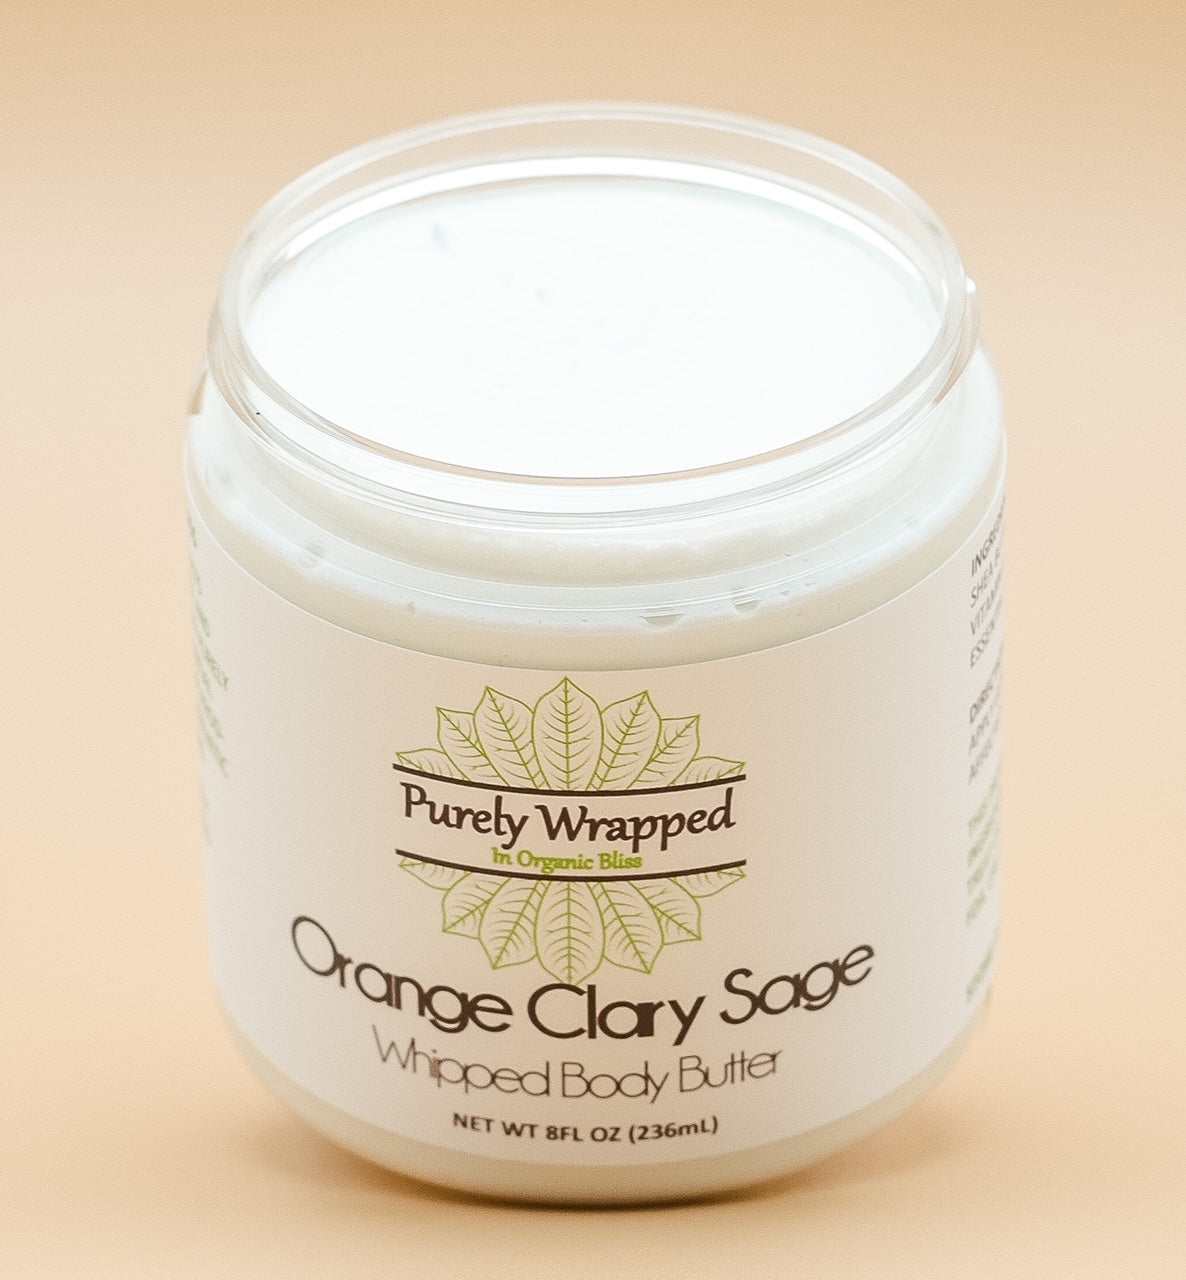 Orange Clary Sage Whipped body Butter